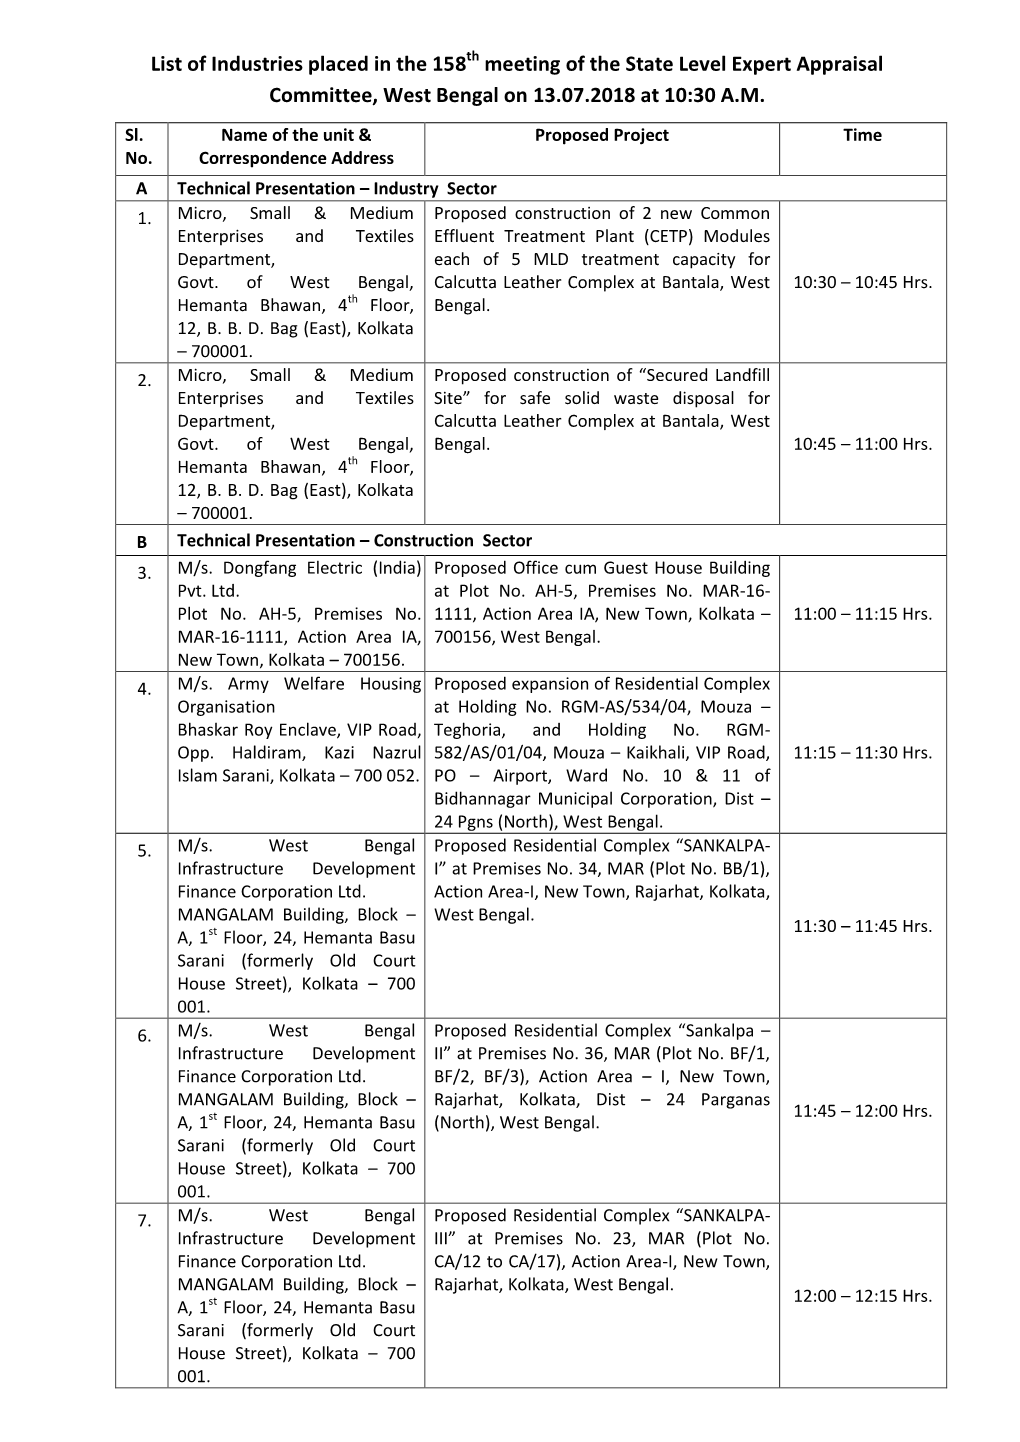 Meeting of the State Level Expert Appraisal Committee, West Bengal on 13.07.2018 at 10:30 A.M